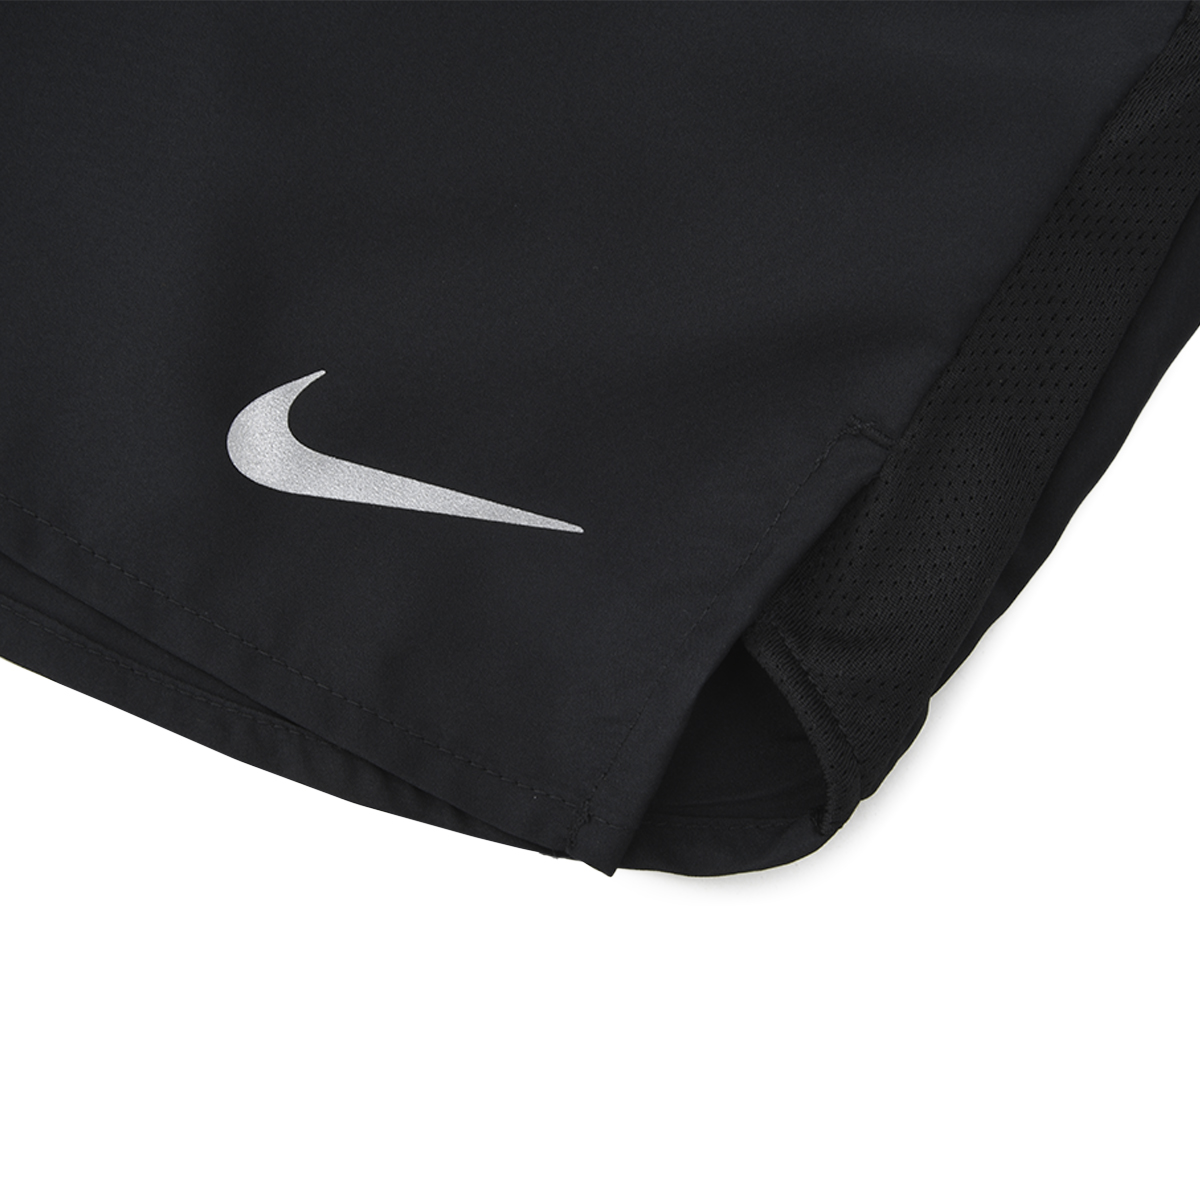 Short Running Nike Dri-fit Challenger Hombre,  image number null